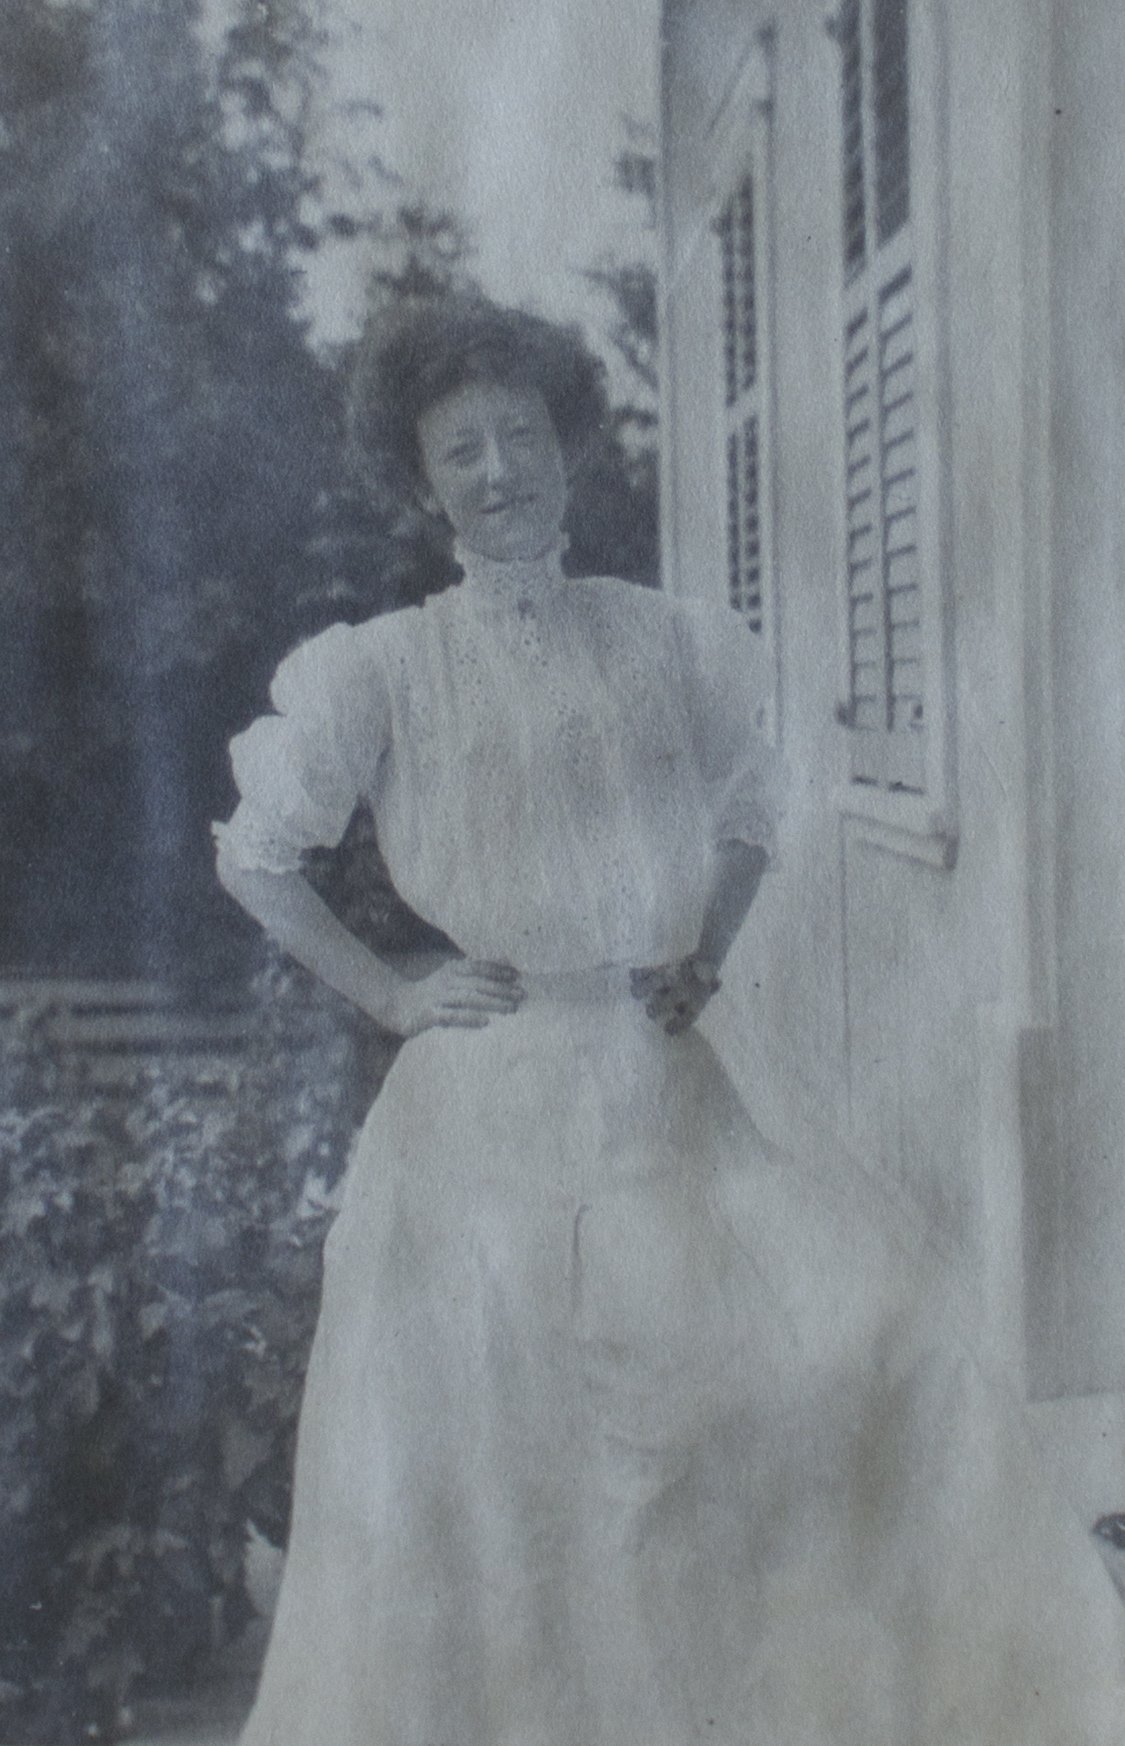 A woman wearing a long white dress with a high neckline; she is quite petite.